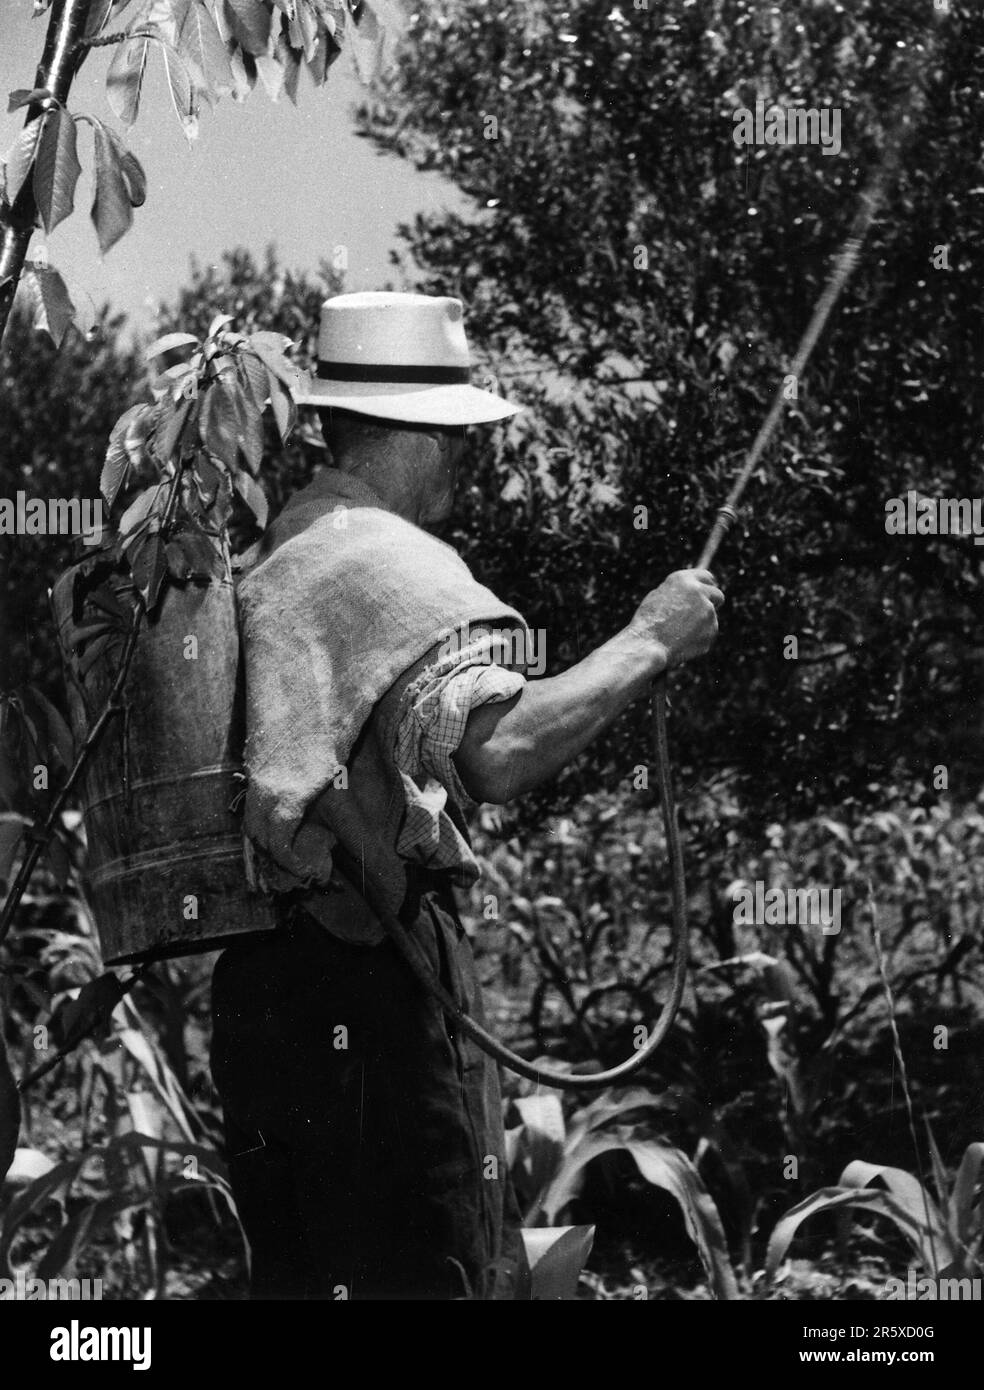 A man spraying insecticide on olive trees in Trieste, Italy. The insecticide was bought with Marshall Plan funds. The Marshall Plan was a very ambitious financial aid program proposed by US Secretary of State George Marshall. He understood that a destroyed and prostrate Europe had to have financial help if it were to recover and to remove the threat of communist insurgency. The aid was given not lent and each country decided on how it would use the funds. In the three years of the program the US gave Europe $13 billion, a colossal sum worth $175 billion at todays values. This far-seeing and ge Stock Photo